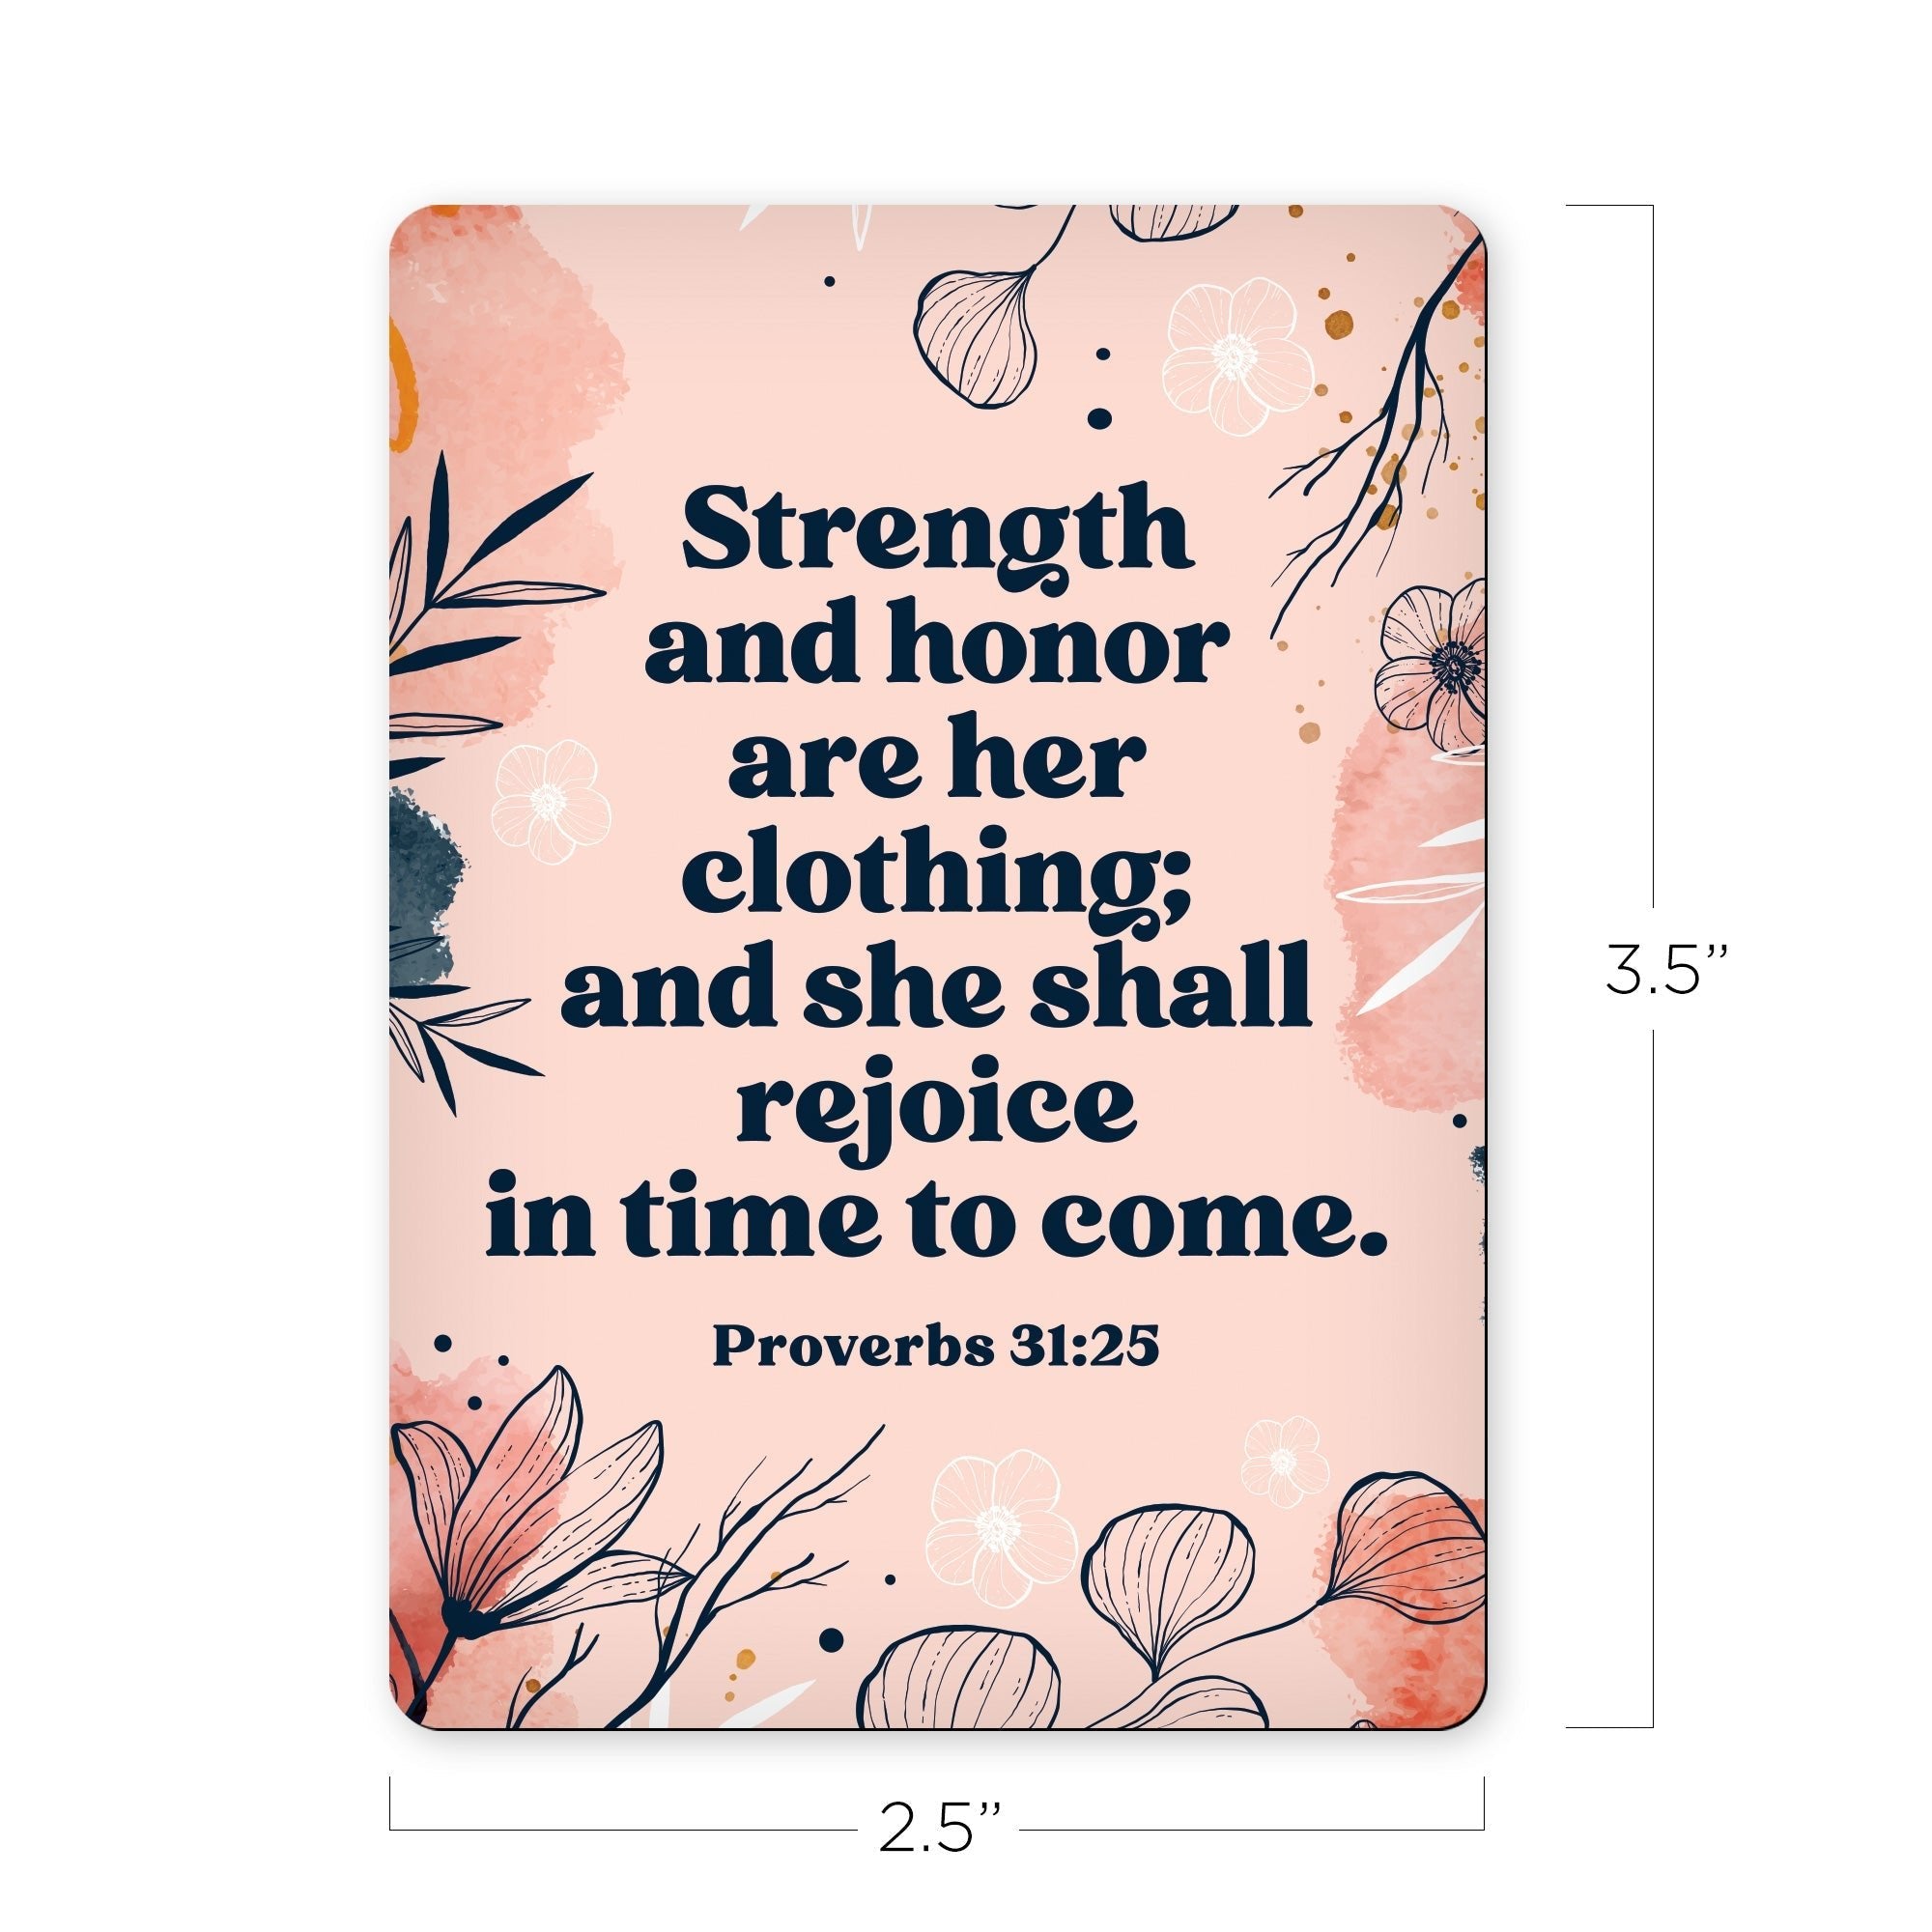 Strength and honor are her clothing - Proverbs 31:25 - Scripture Magnet